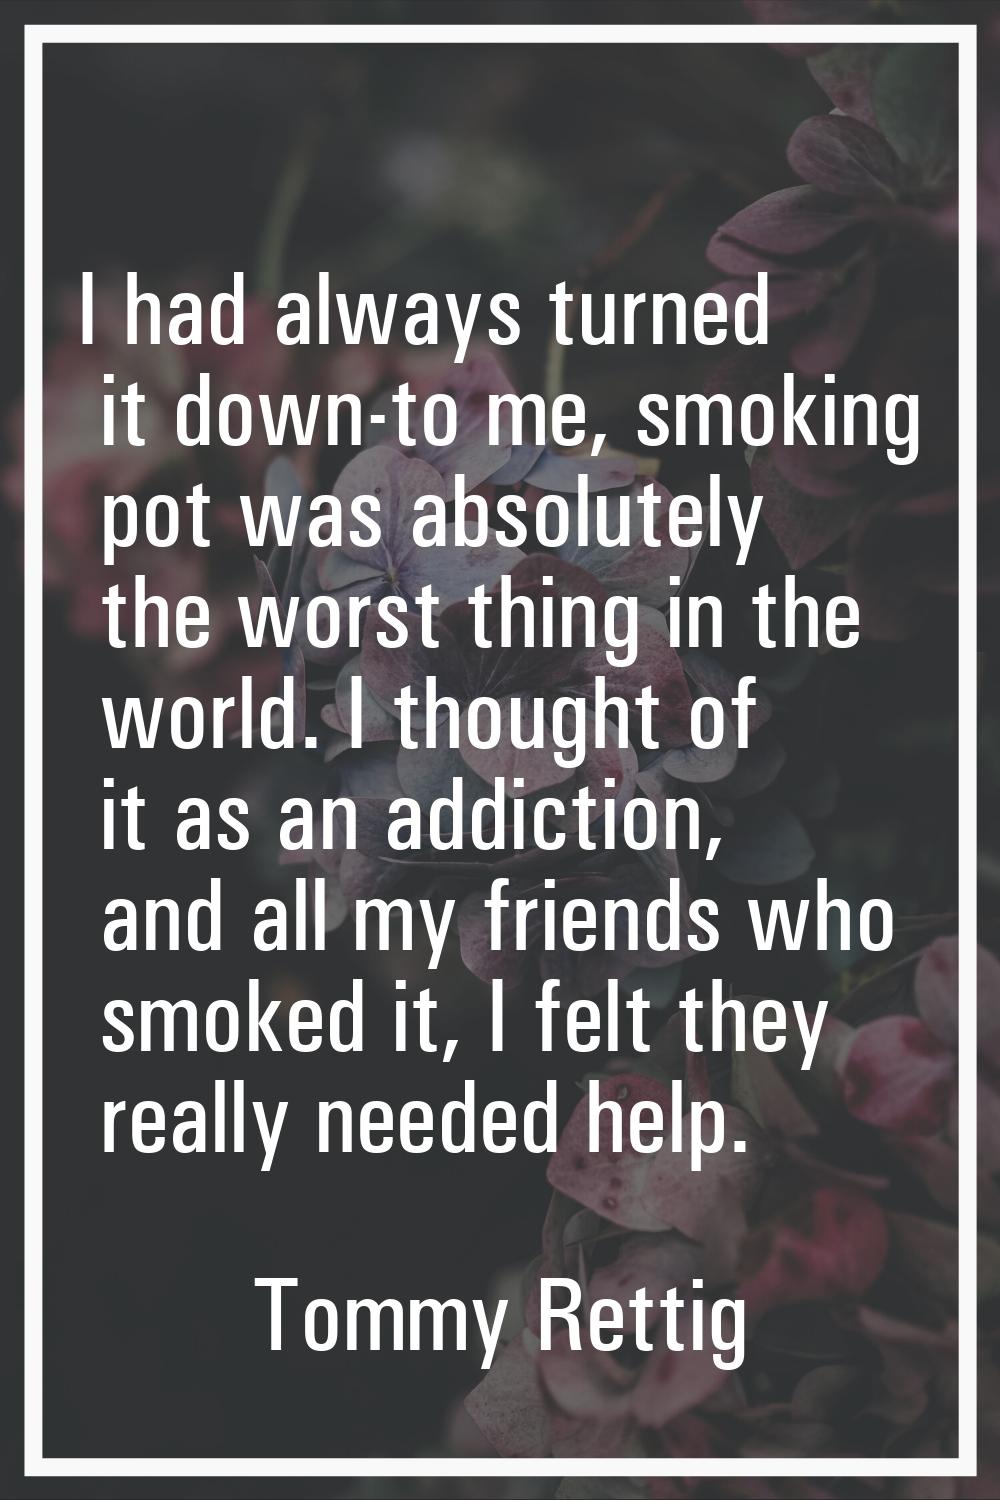 I had always turned it down-to me, smoking pot was absolutely the worst thing in the world. I thoug